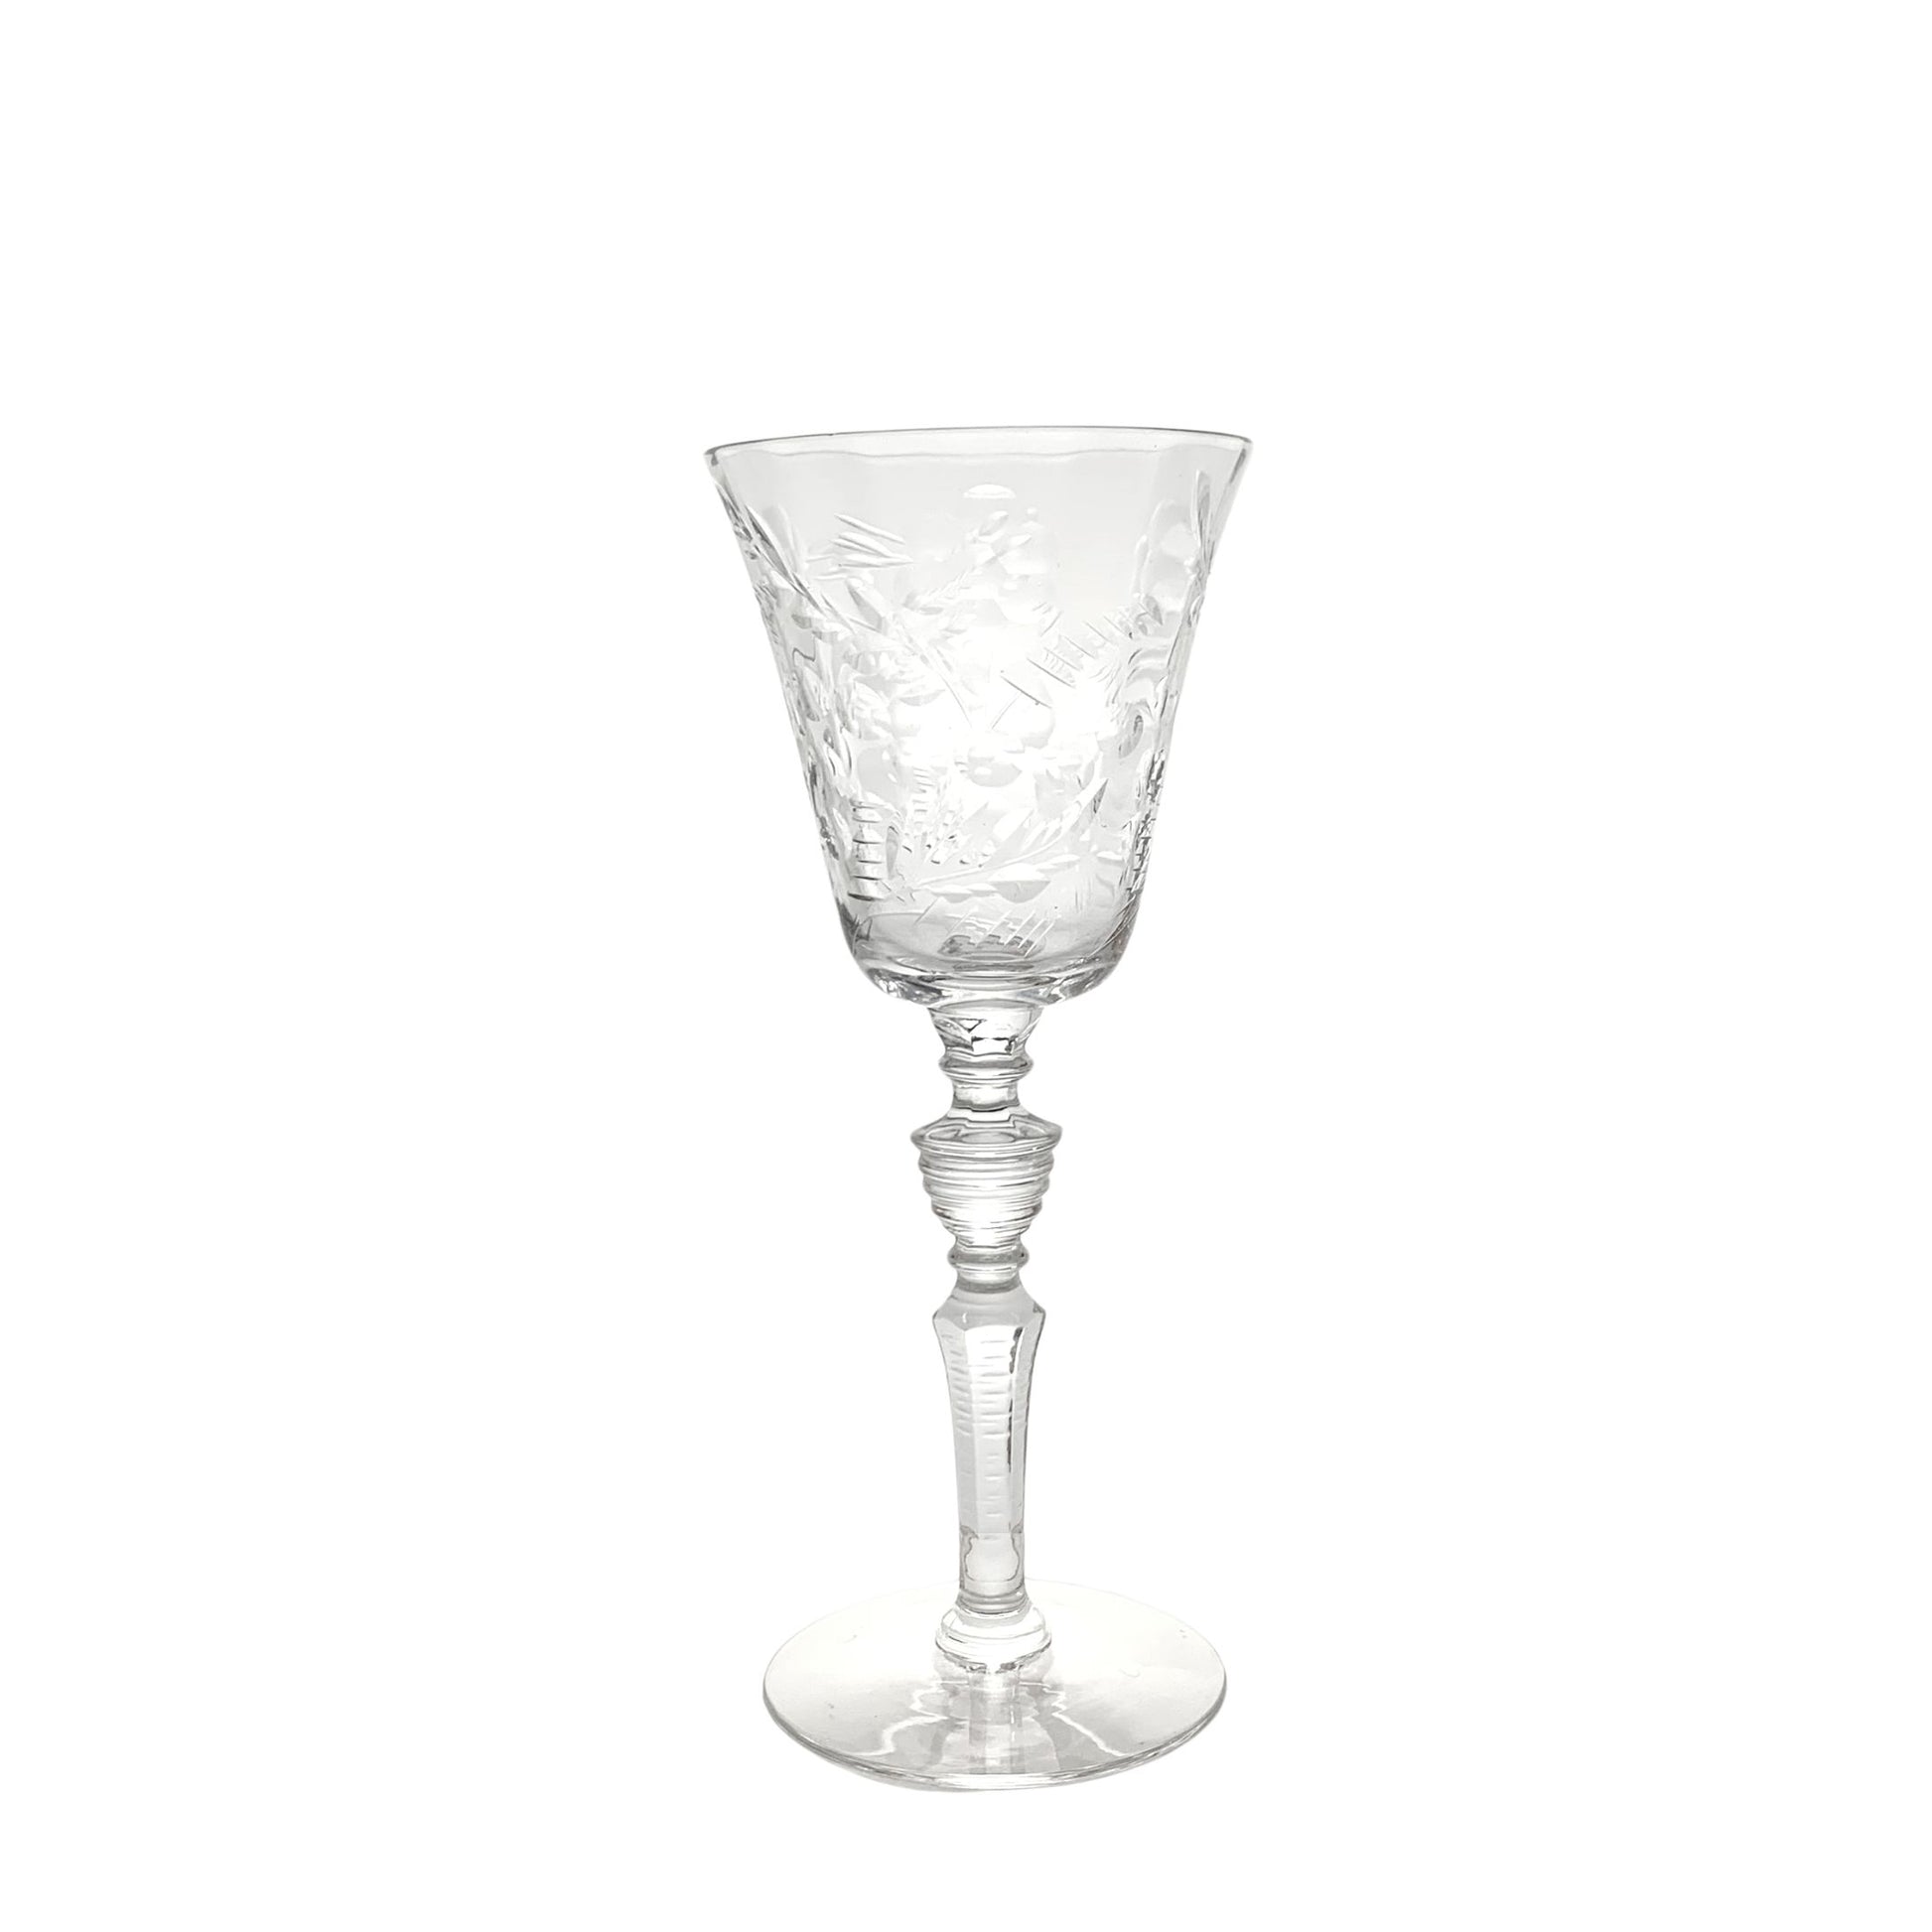 Luxury Crystal Glass Textured Wine Glasses Set m, 4ppch, 6pice